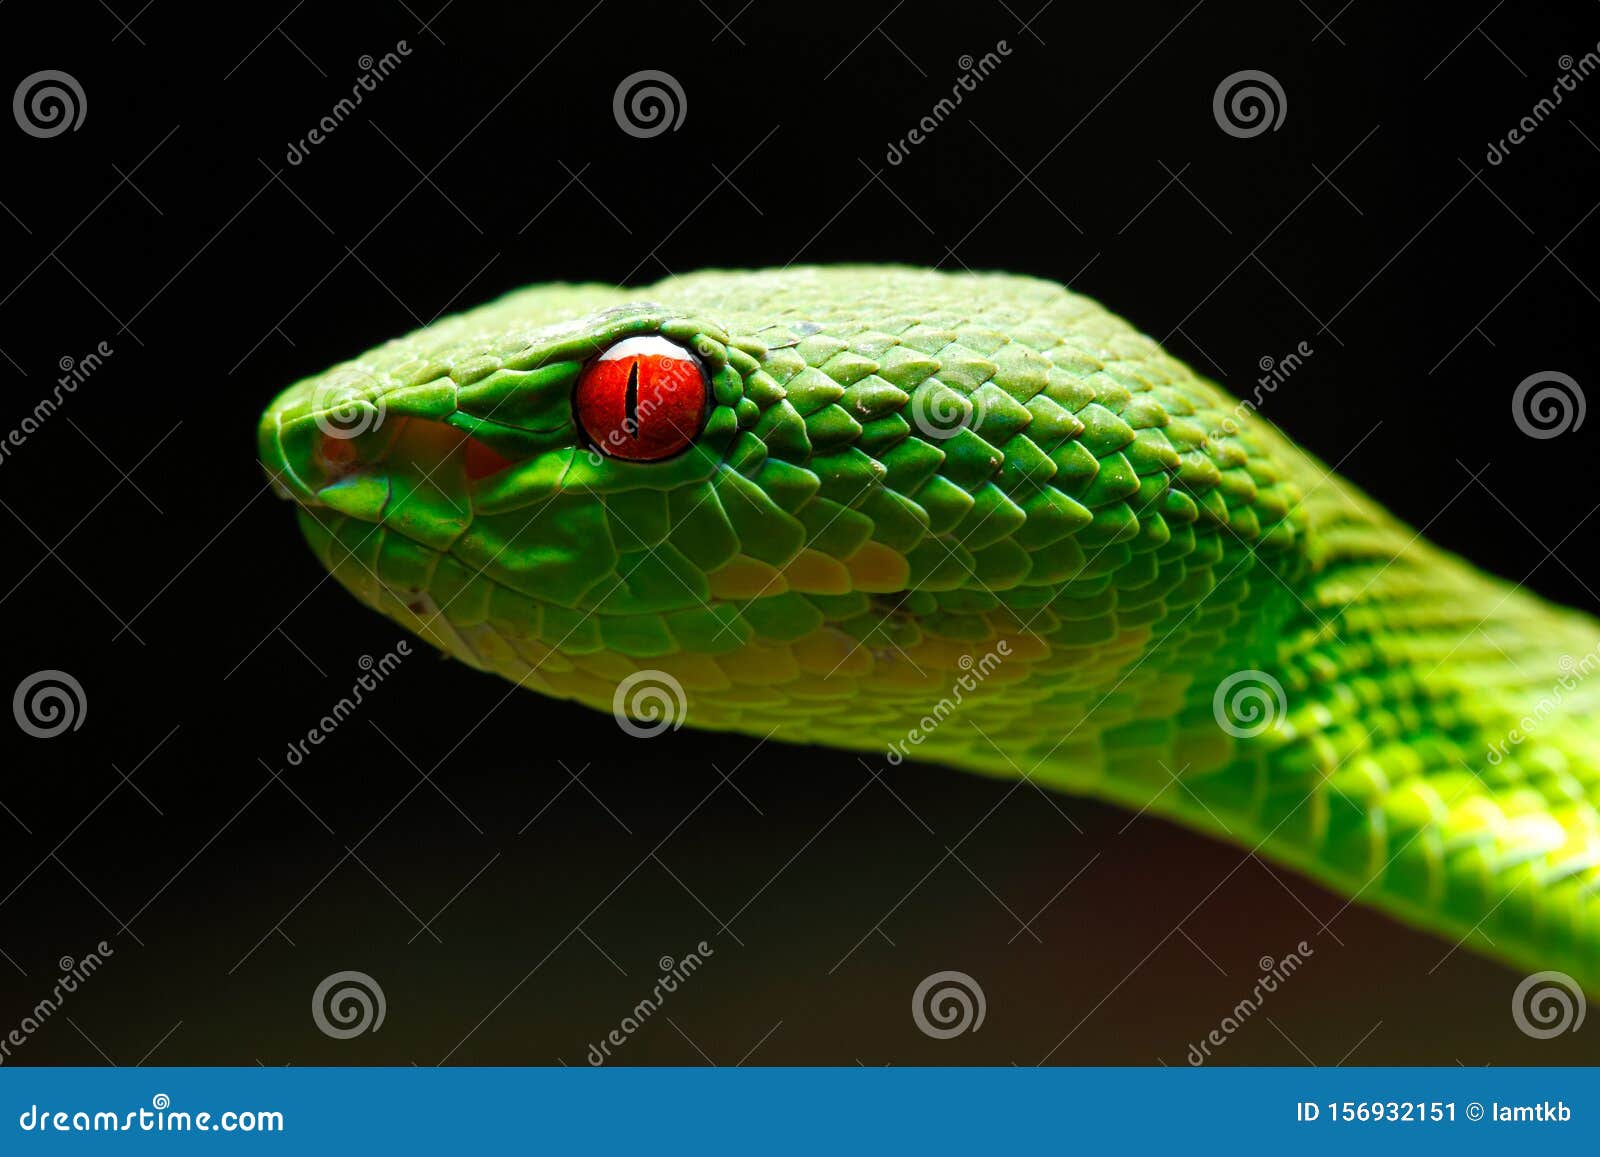 Green Pit Viper Portrait Stock Image Image Of Detail 156932151